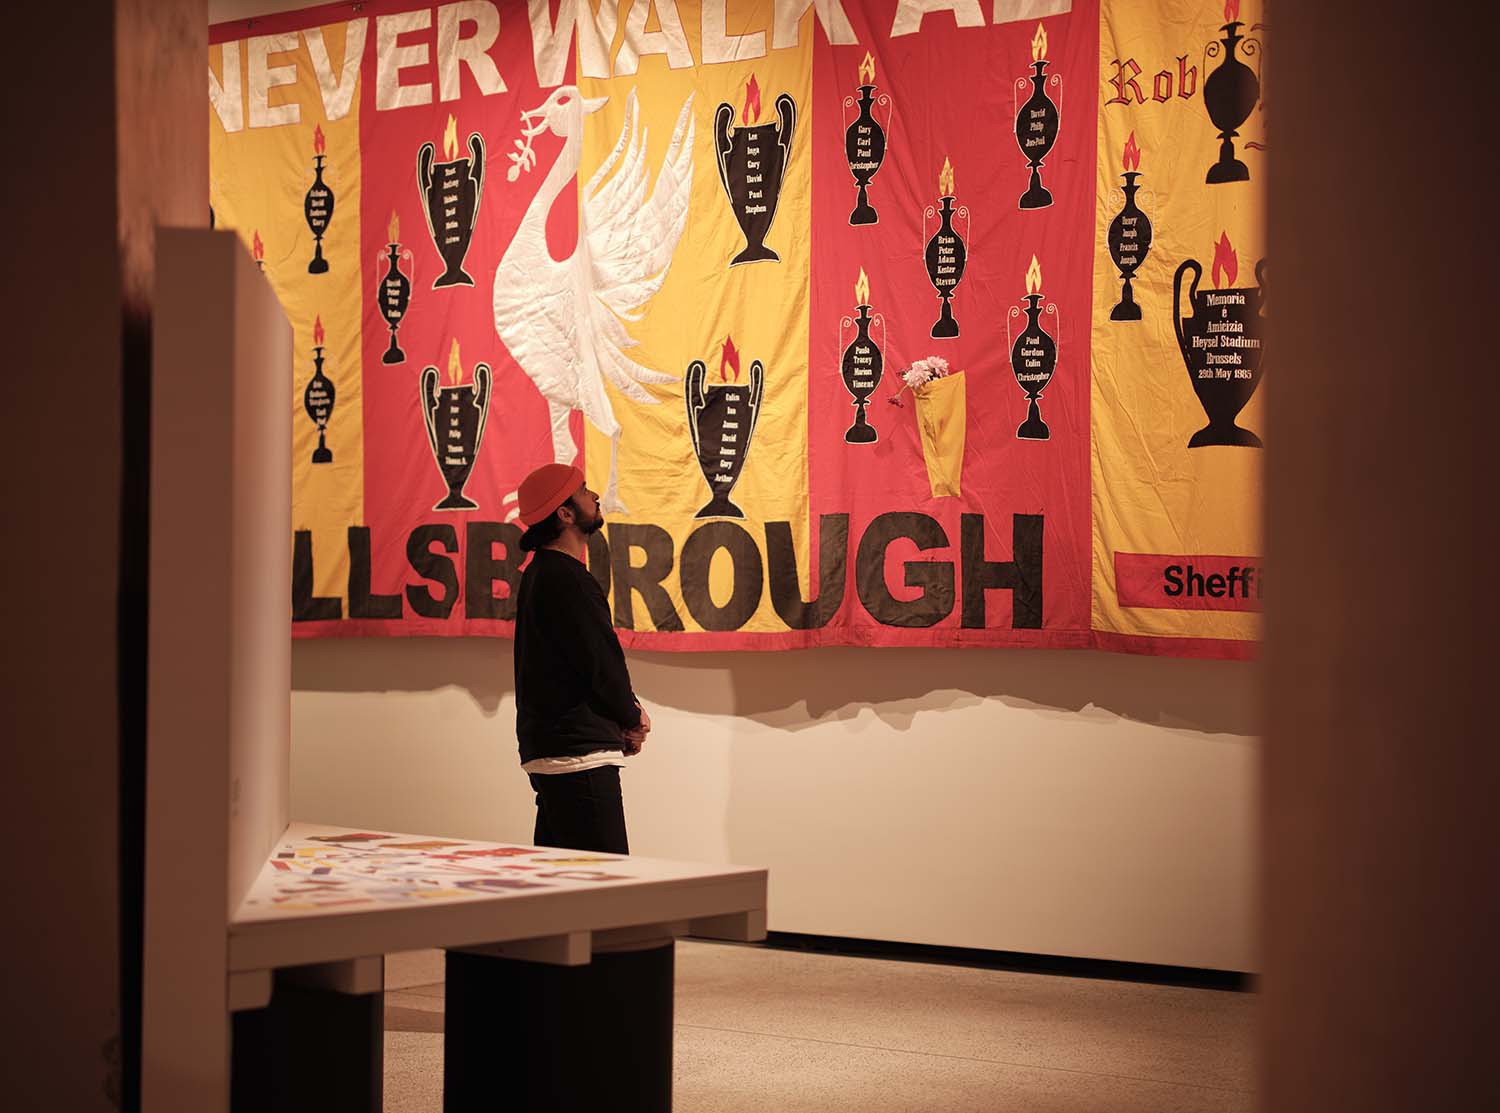 Hillsborough Memorial Banner by Peter Carney and Christine Waygood - 2009